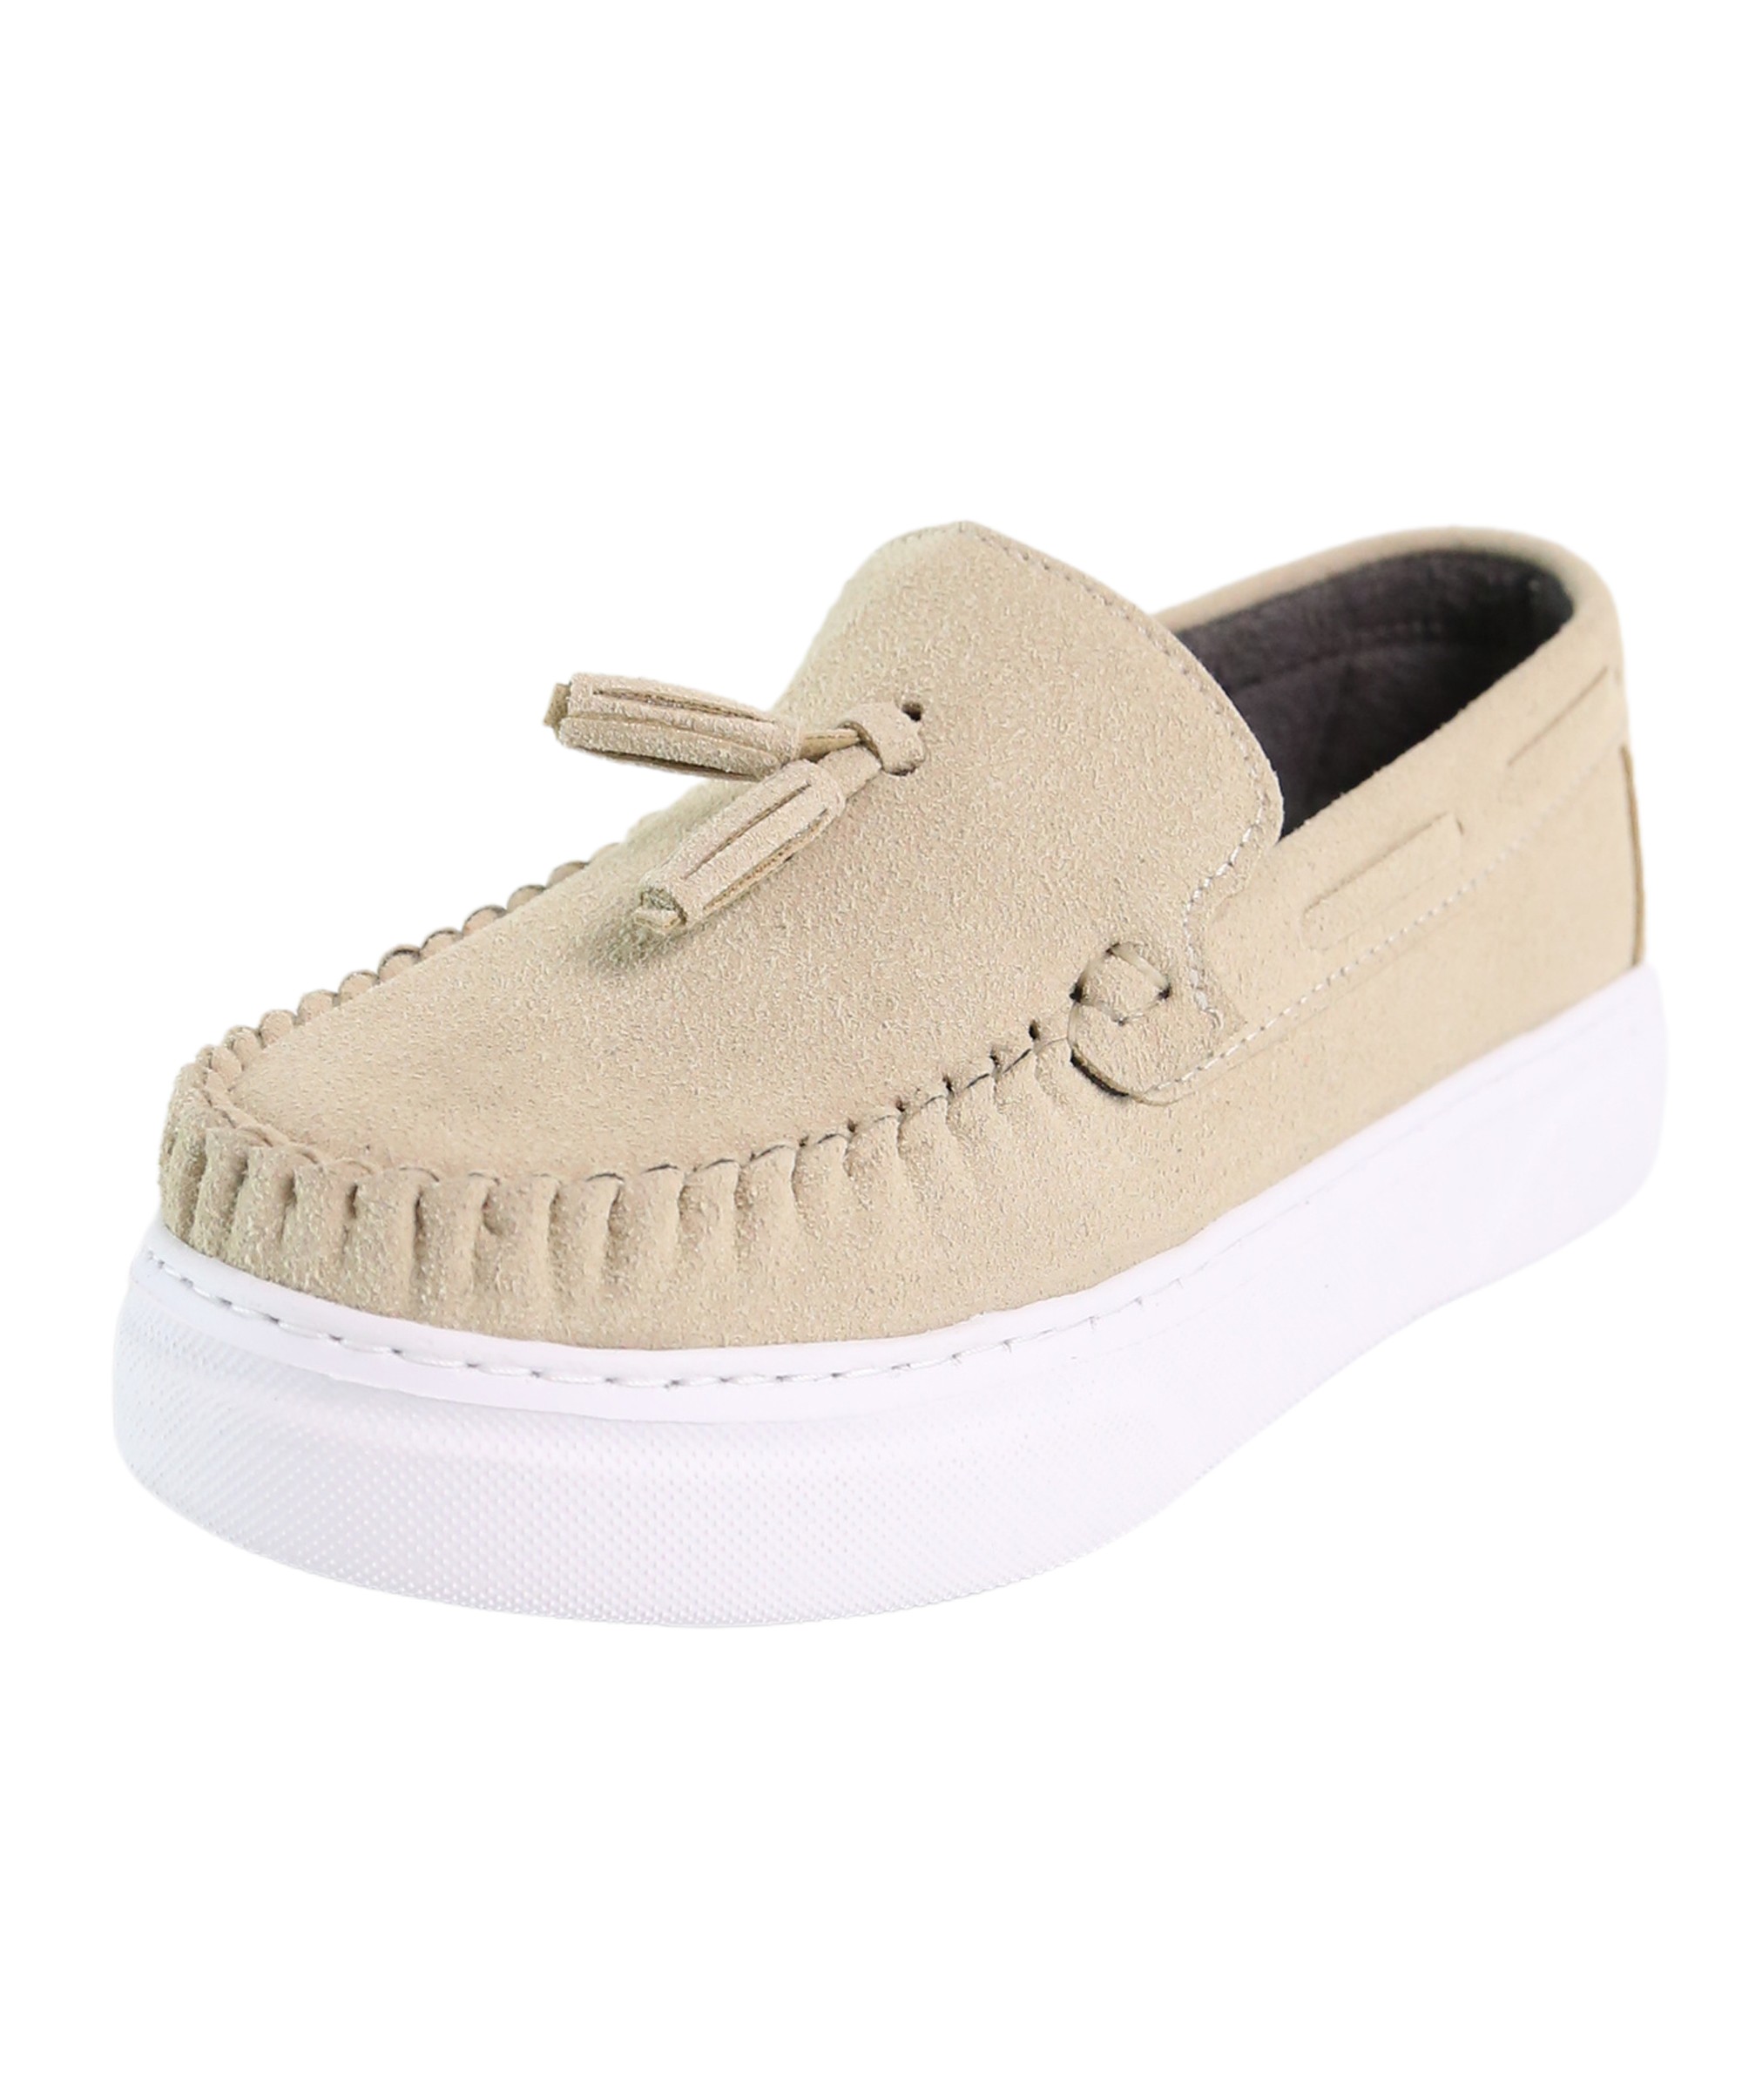 Boys Suede Slip-On Thick Sole Loafers - URBAN - Beige